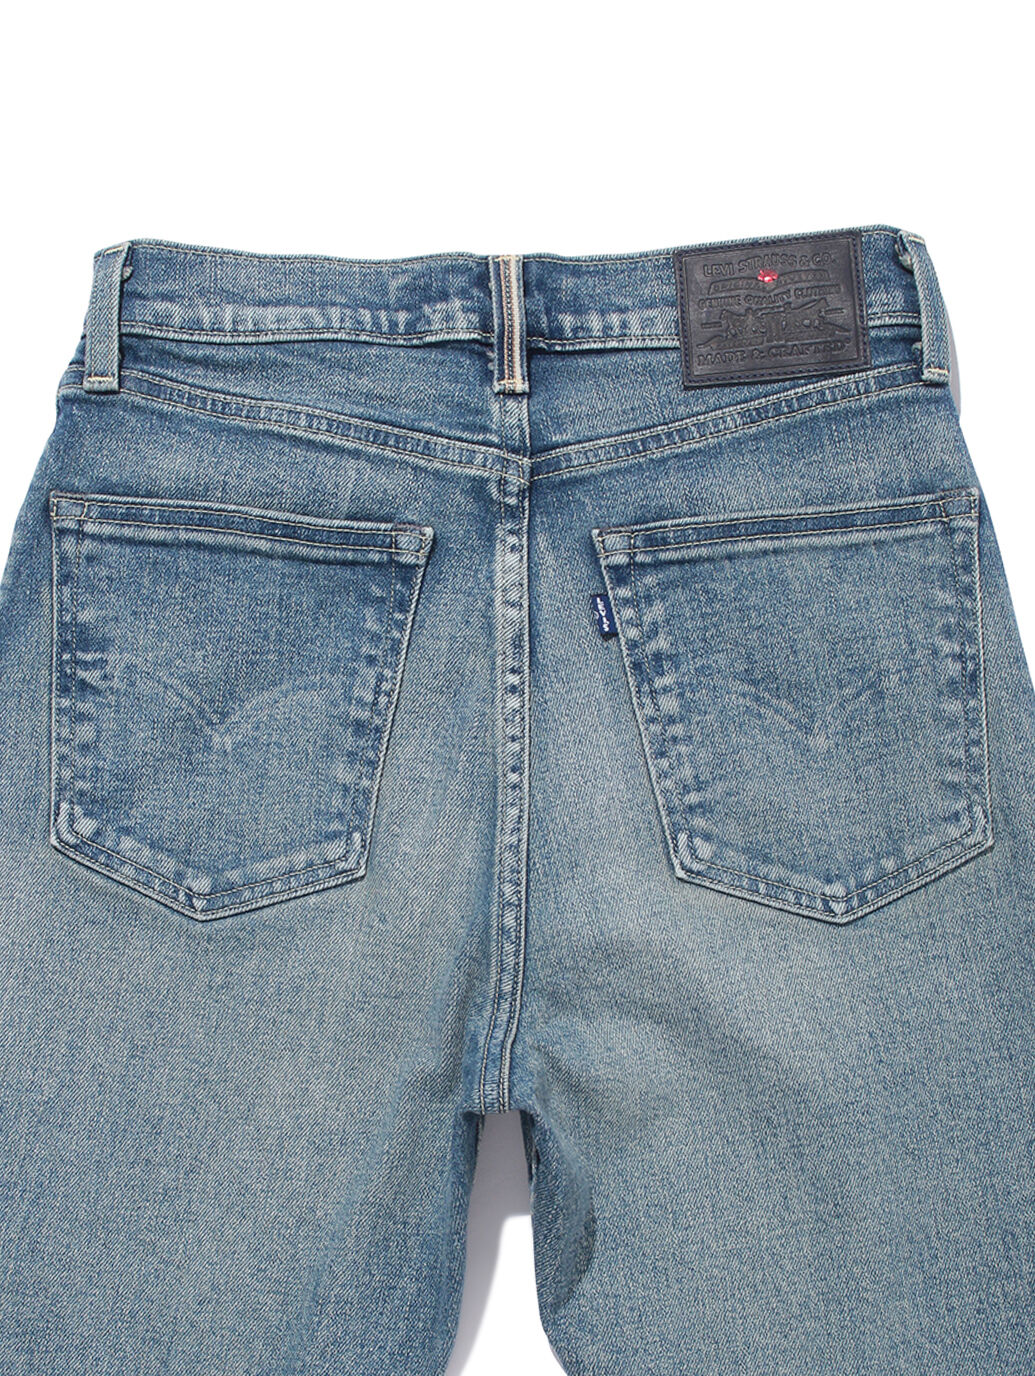 LEVI'S® MADE&CRAFTED®HIGHRISE SLIM KAGAMI MADE IN JAPAN 